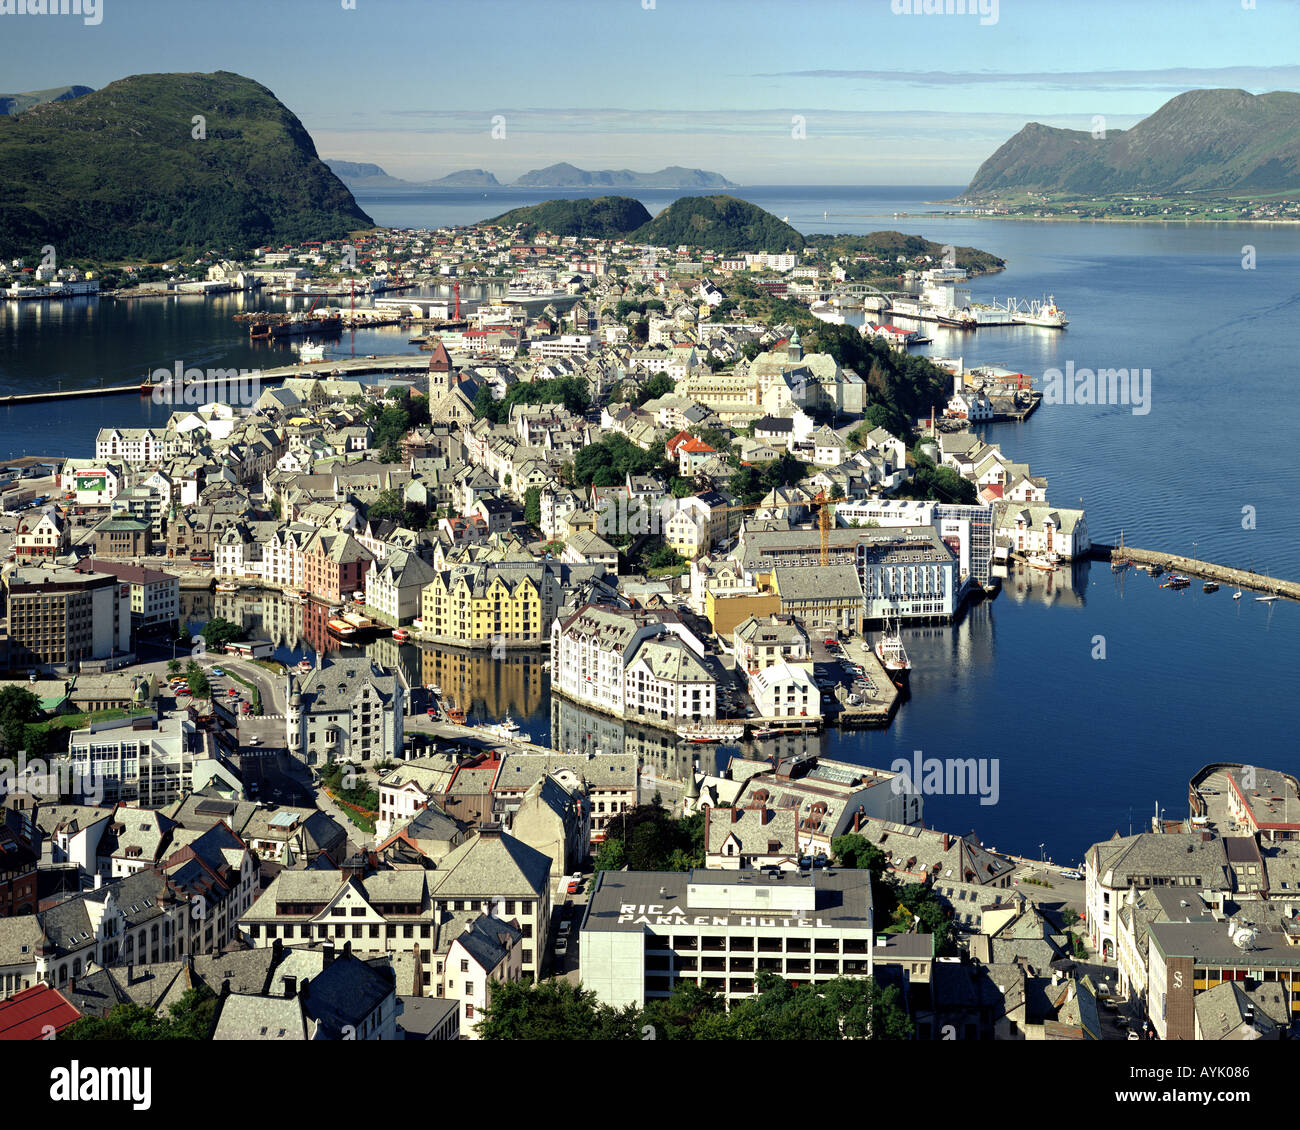 NO - MORE OG ROMSDAL: Alesund seen from Aksla Mountain Stock Photo